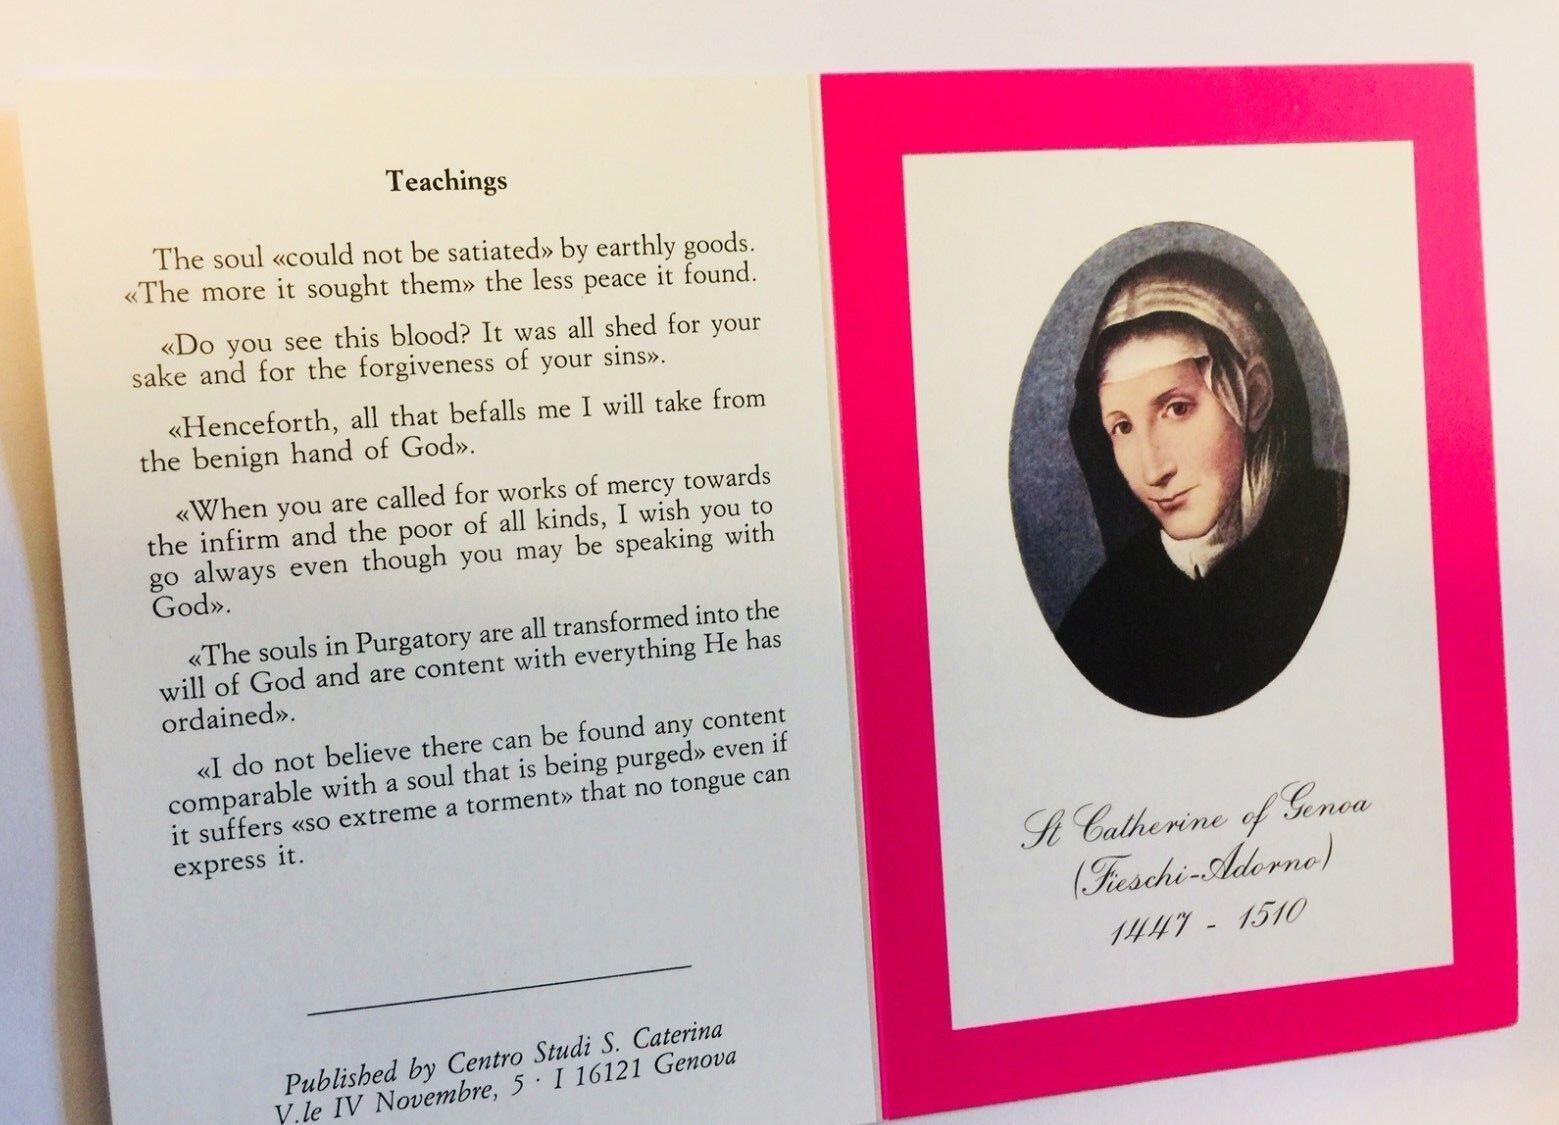 Saint Catherine of Genoa Prayer with Bio & Teachings Folder, From Italy - Bob and Penny Lord